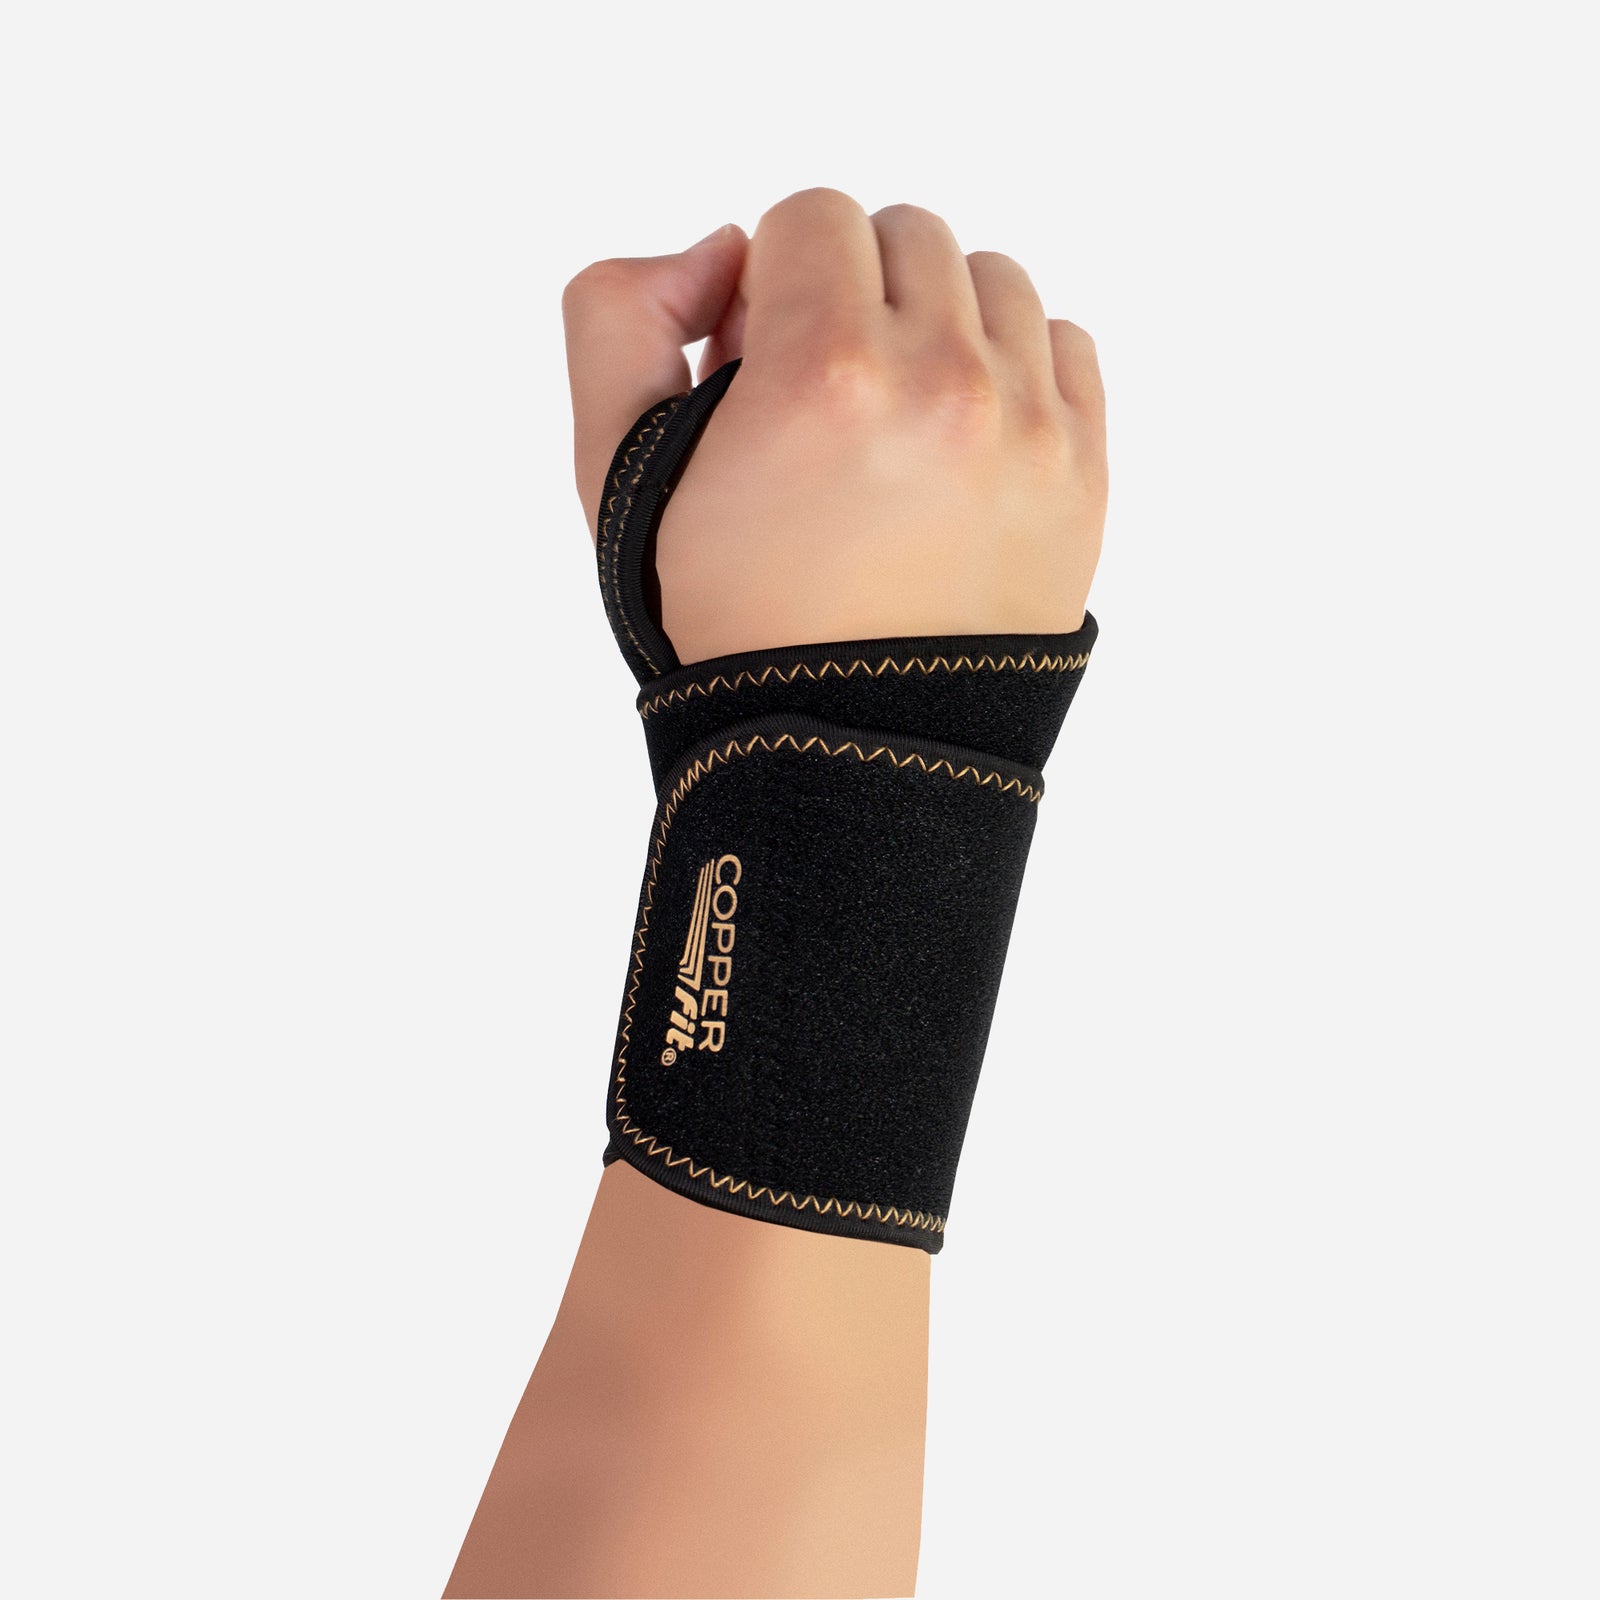 Tommie Copper Sport Hot and Cold Compression Back Wrap, Black, One